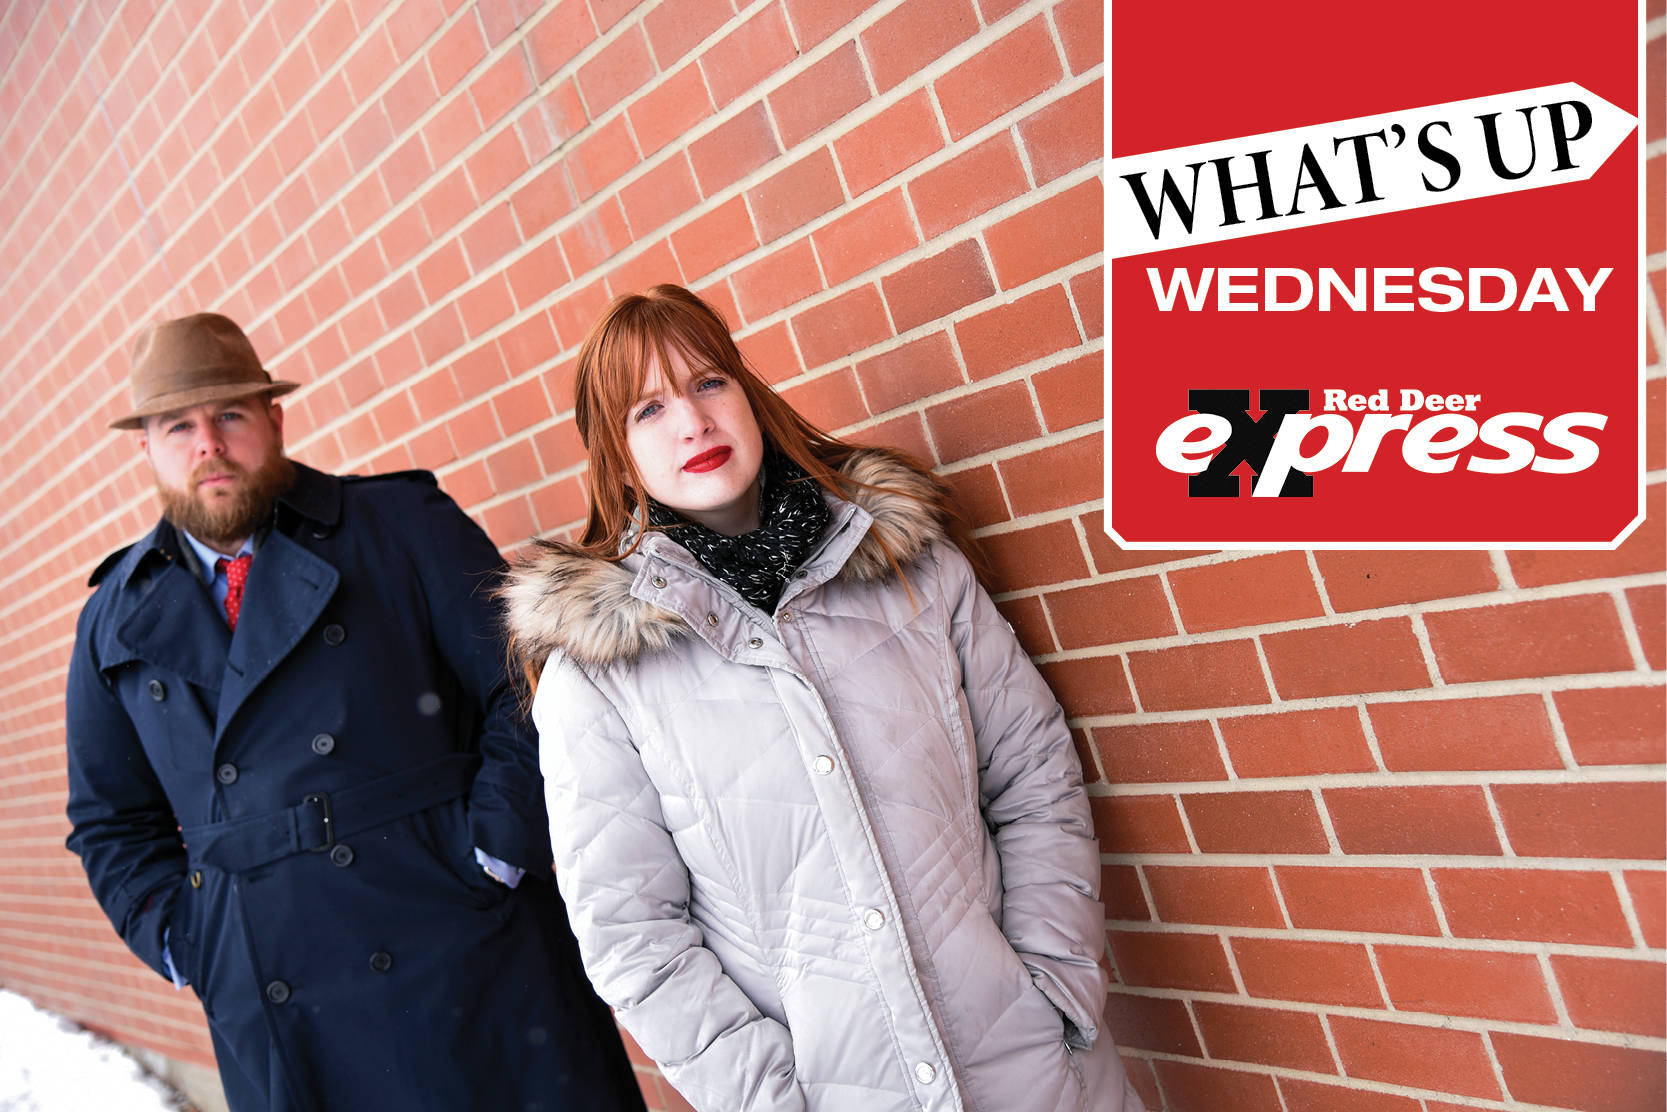 NEW SHOW - What’s Up Wednesday is returning for it’s second episode. Crux Phiri/Red Deer Express